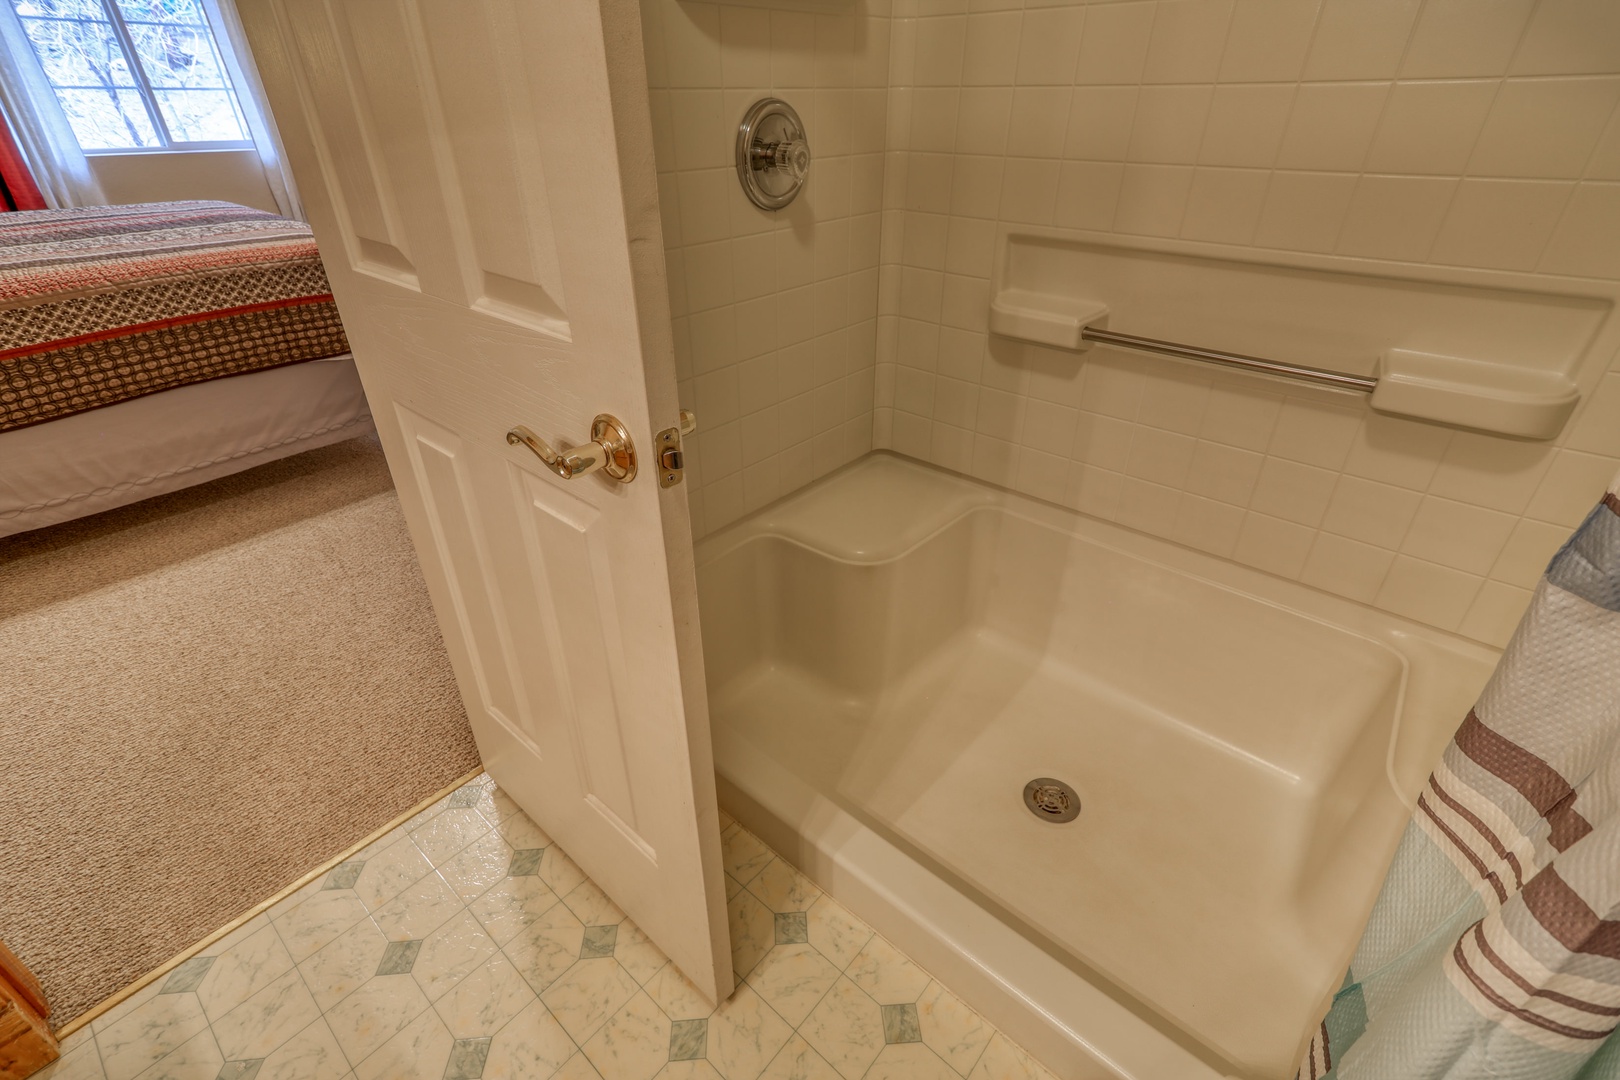 Easy step-in shower stall